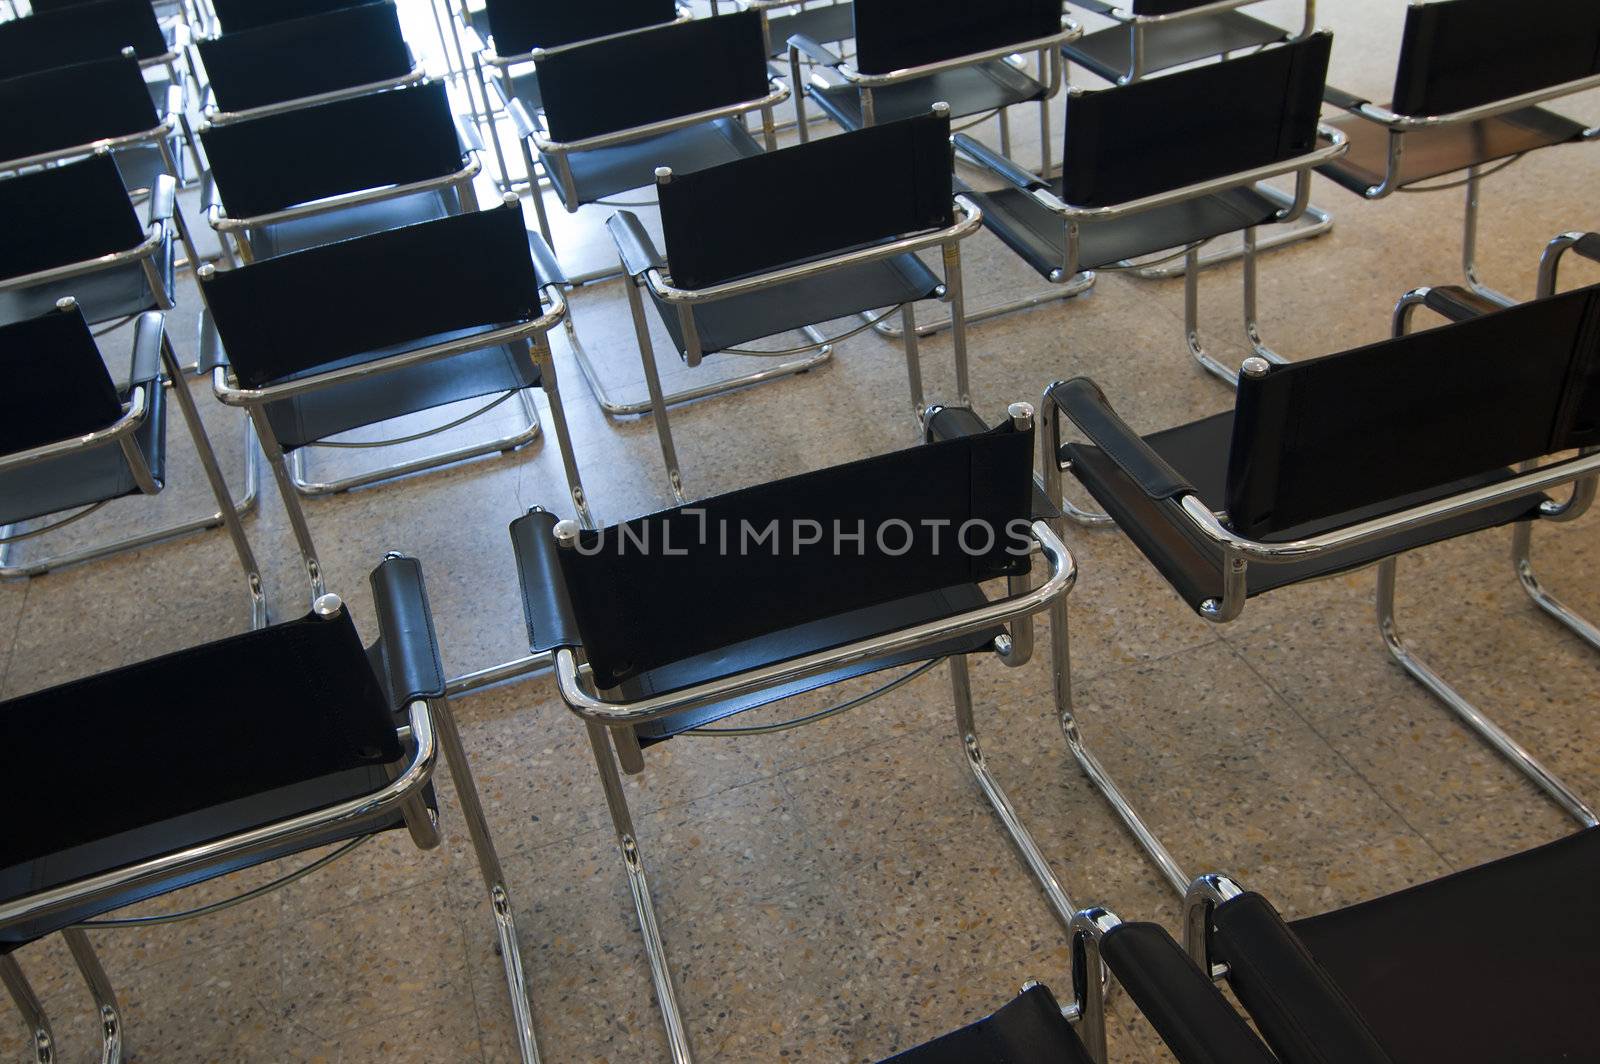 Many contemporary black chairs in a room